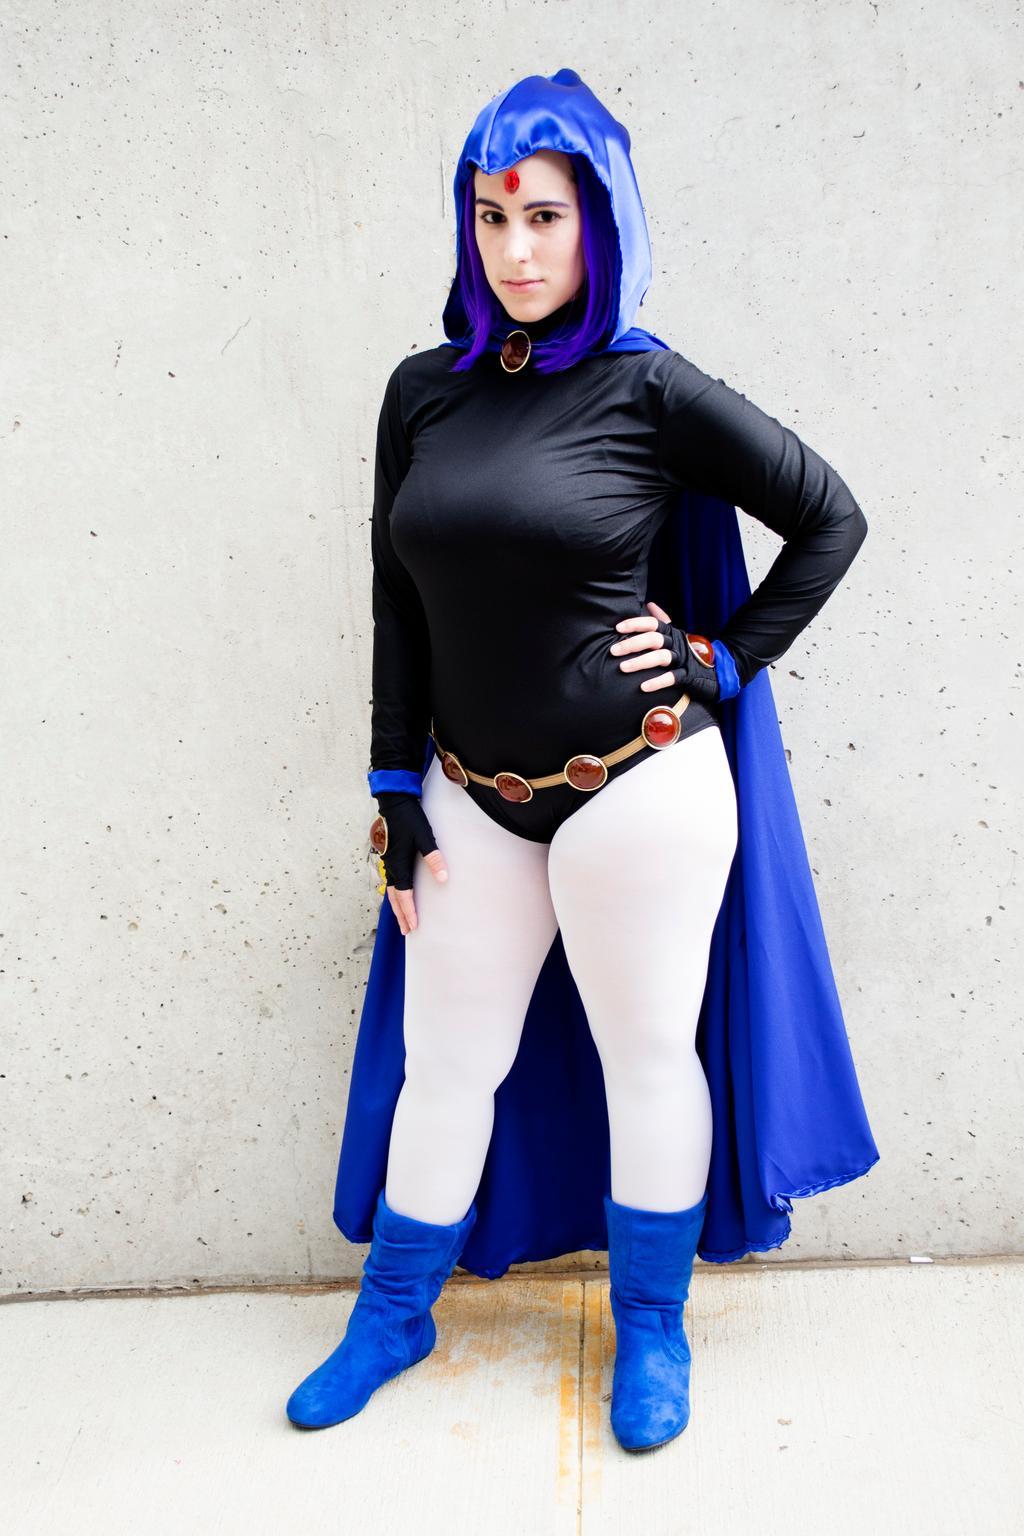 50+ Hot Pictures Of Raven From Teen Titans, DC Comics. 22